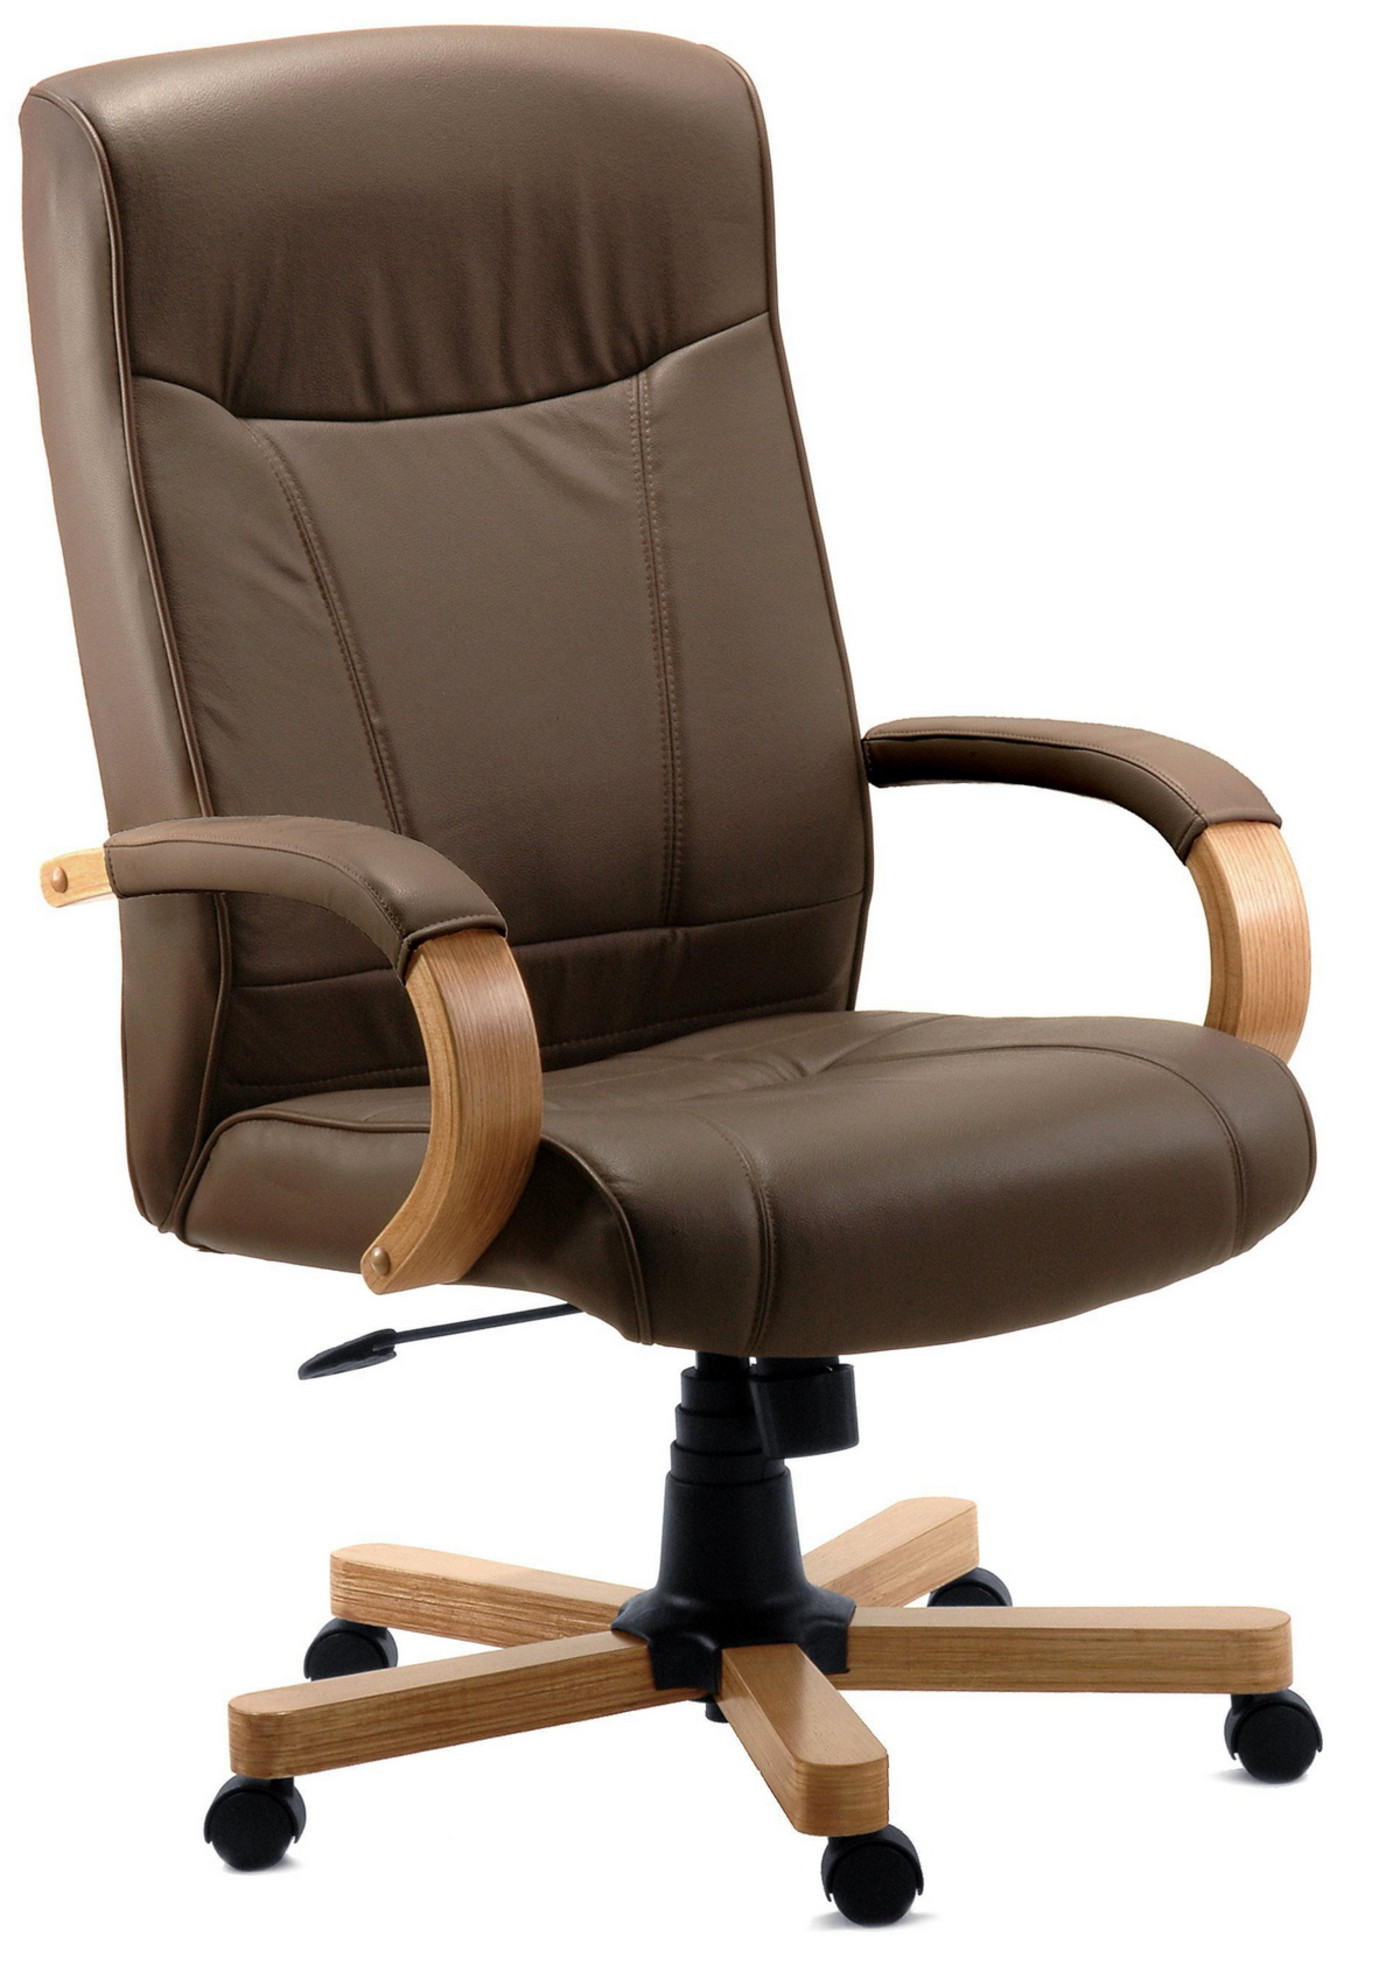 Simple Office Chair Black Friday Uk 